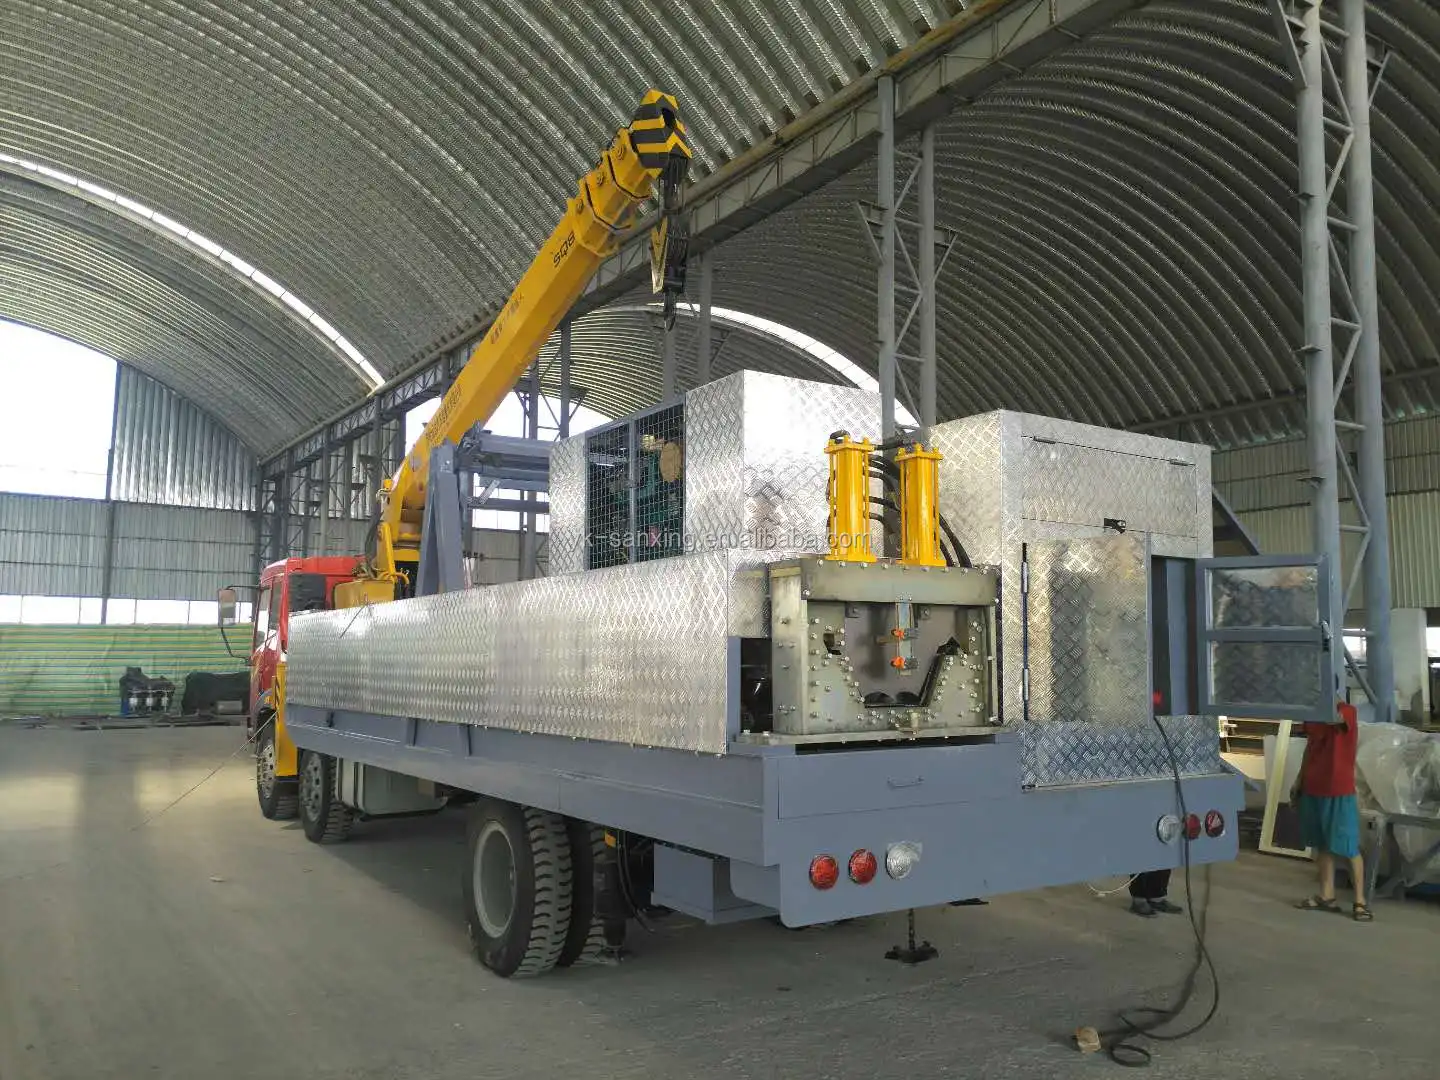 SANXING K Qspan SUBM240 SX-914-610 arch roof forming machine vertical type roof building machine